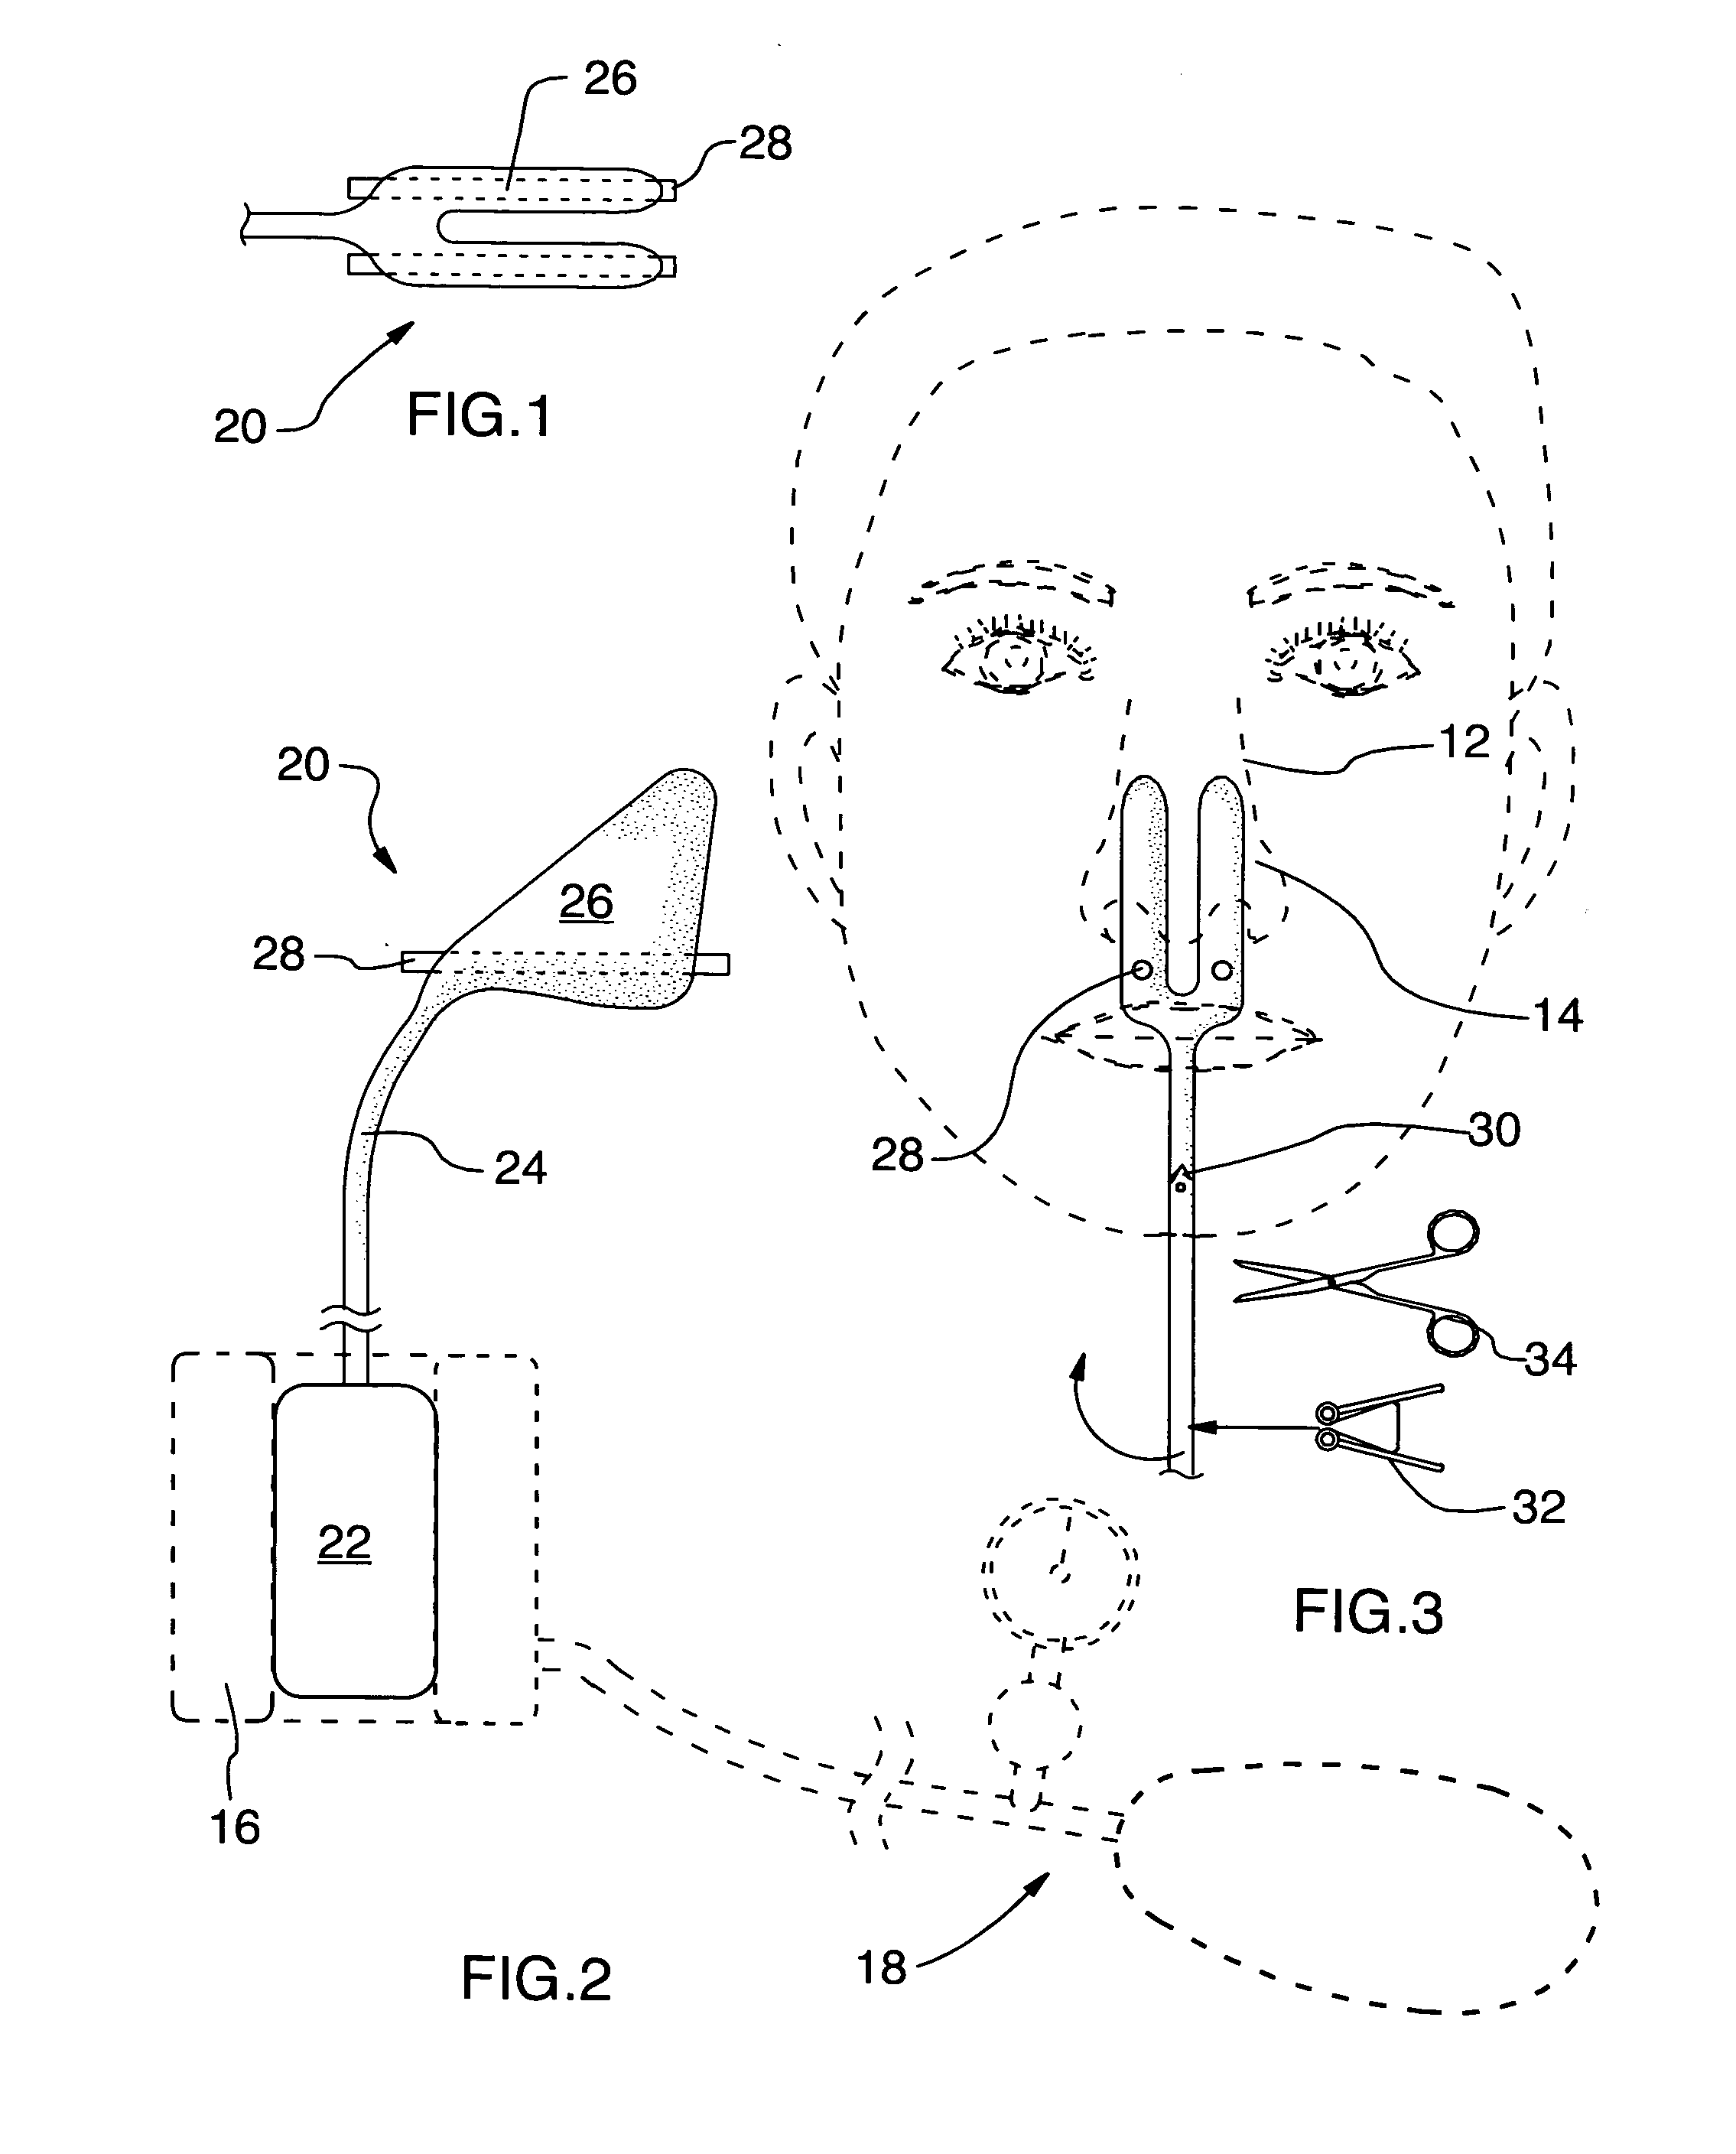 Epitaxis apparatus and method